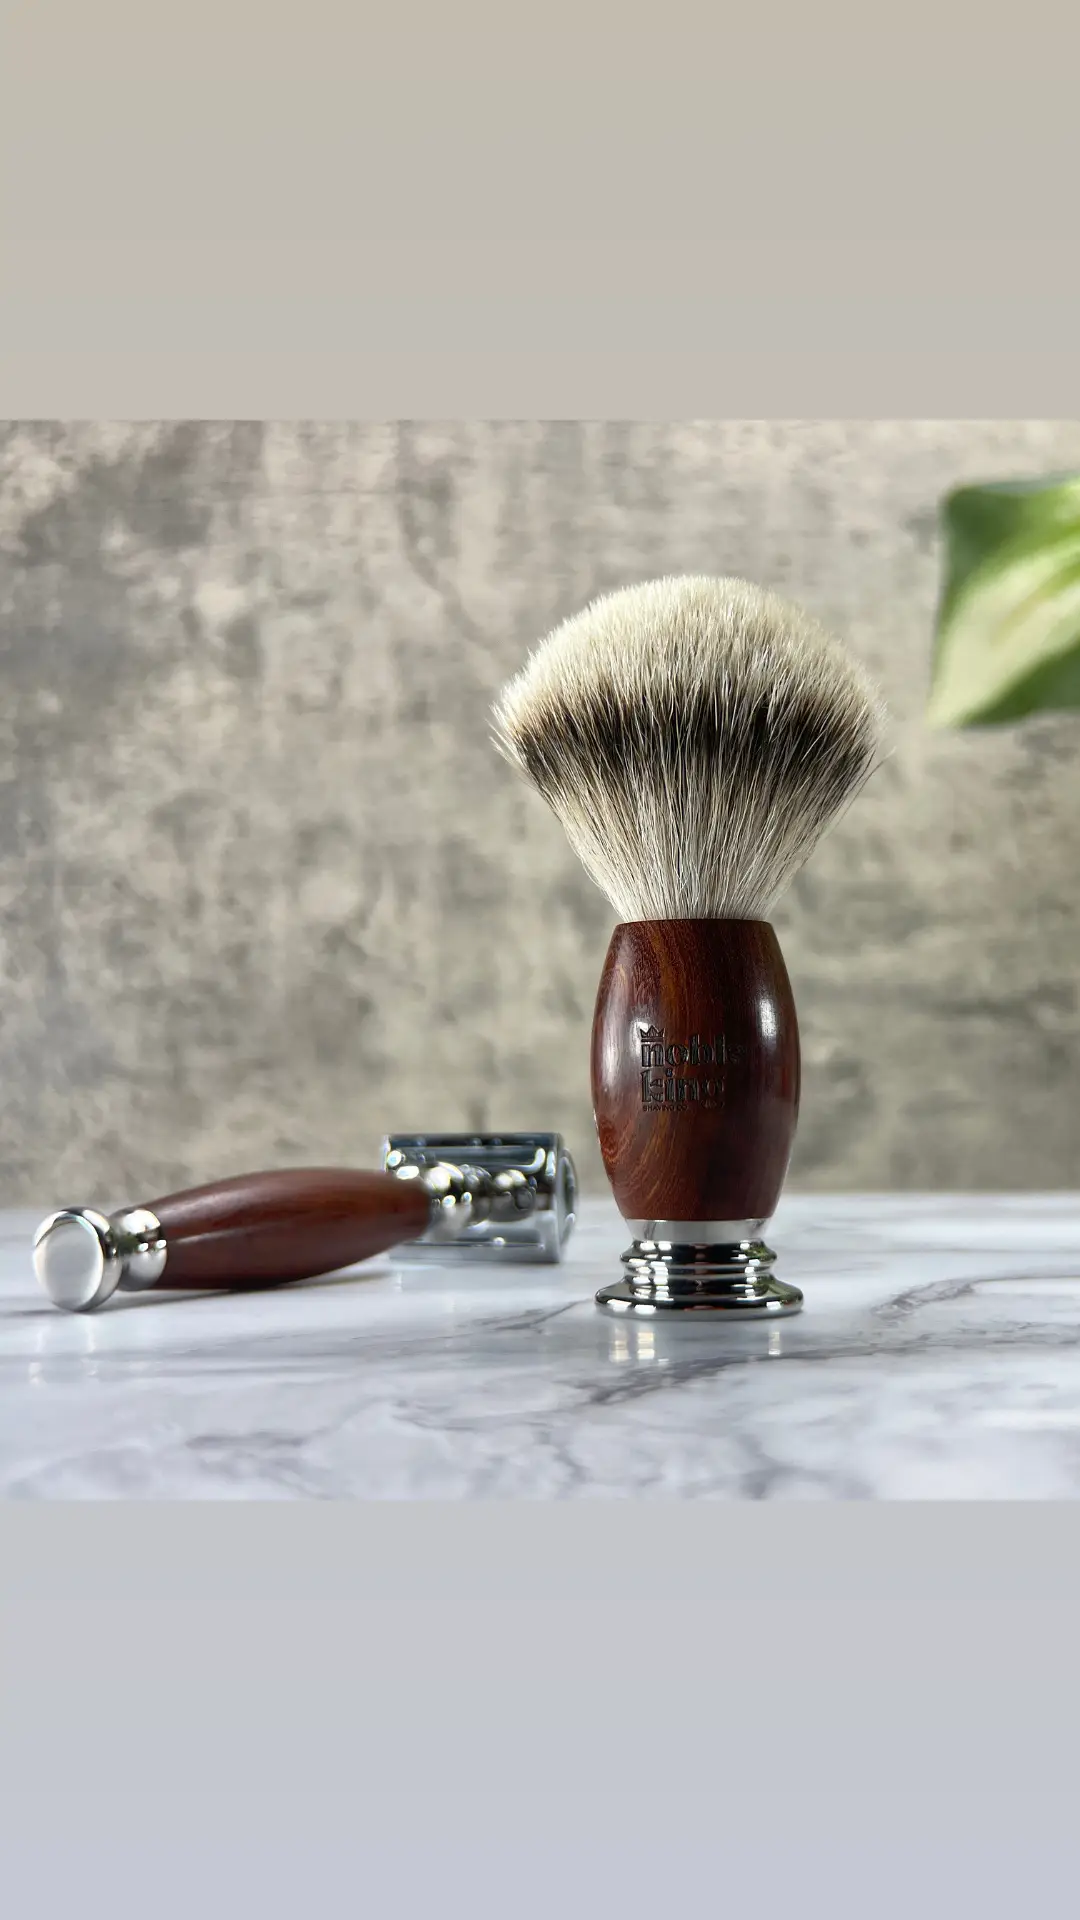 FATHER’S DAY SALE ENDS SOON!! 🔥 Shop $30 off our luxury shaving kit and free 2-day shipping! 🪒 #fathersdaygifts #giftsfordad #giftsforhim #mensfashion #reels #giftsforhusband #mensgifts #mensgrooming #shaving #beard #beardgang #amazonfinds #etsyshop #menshair #menstyle 